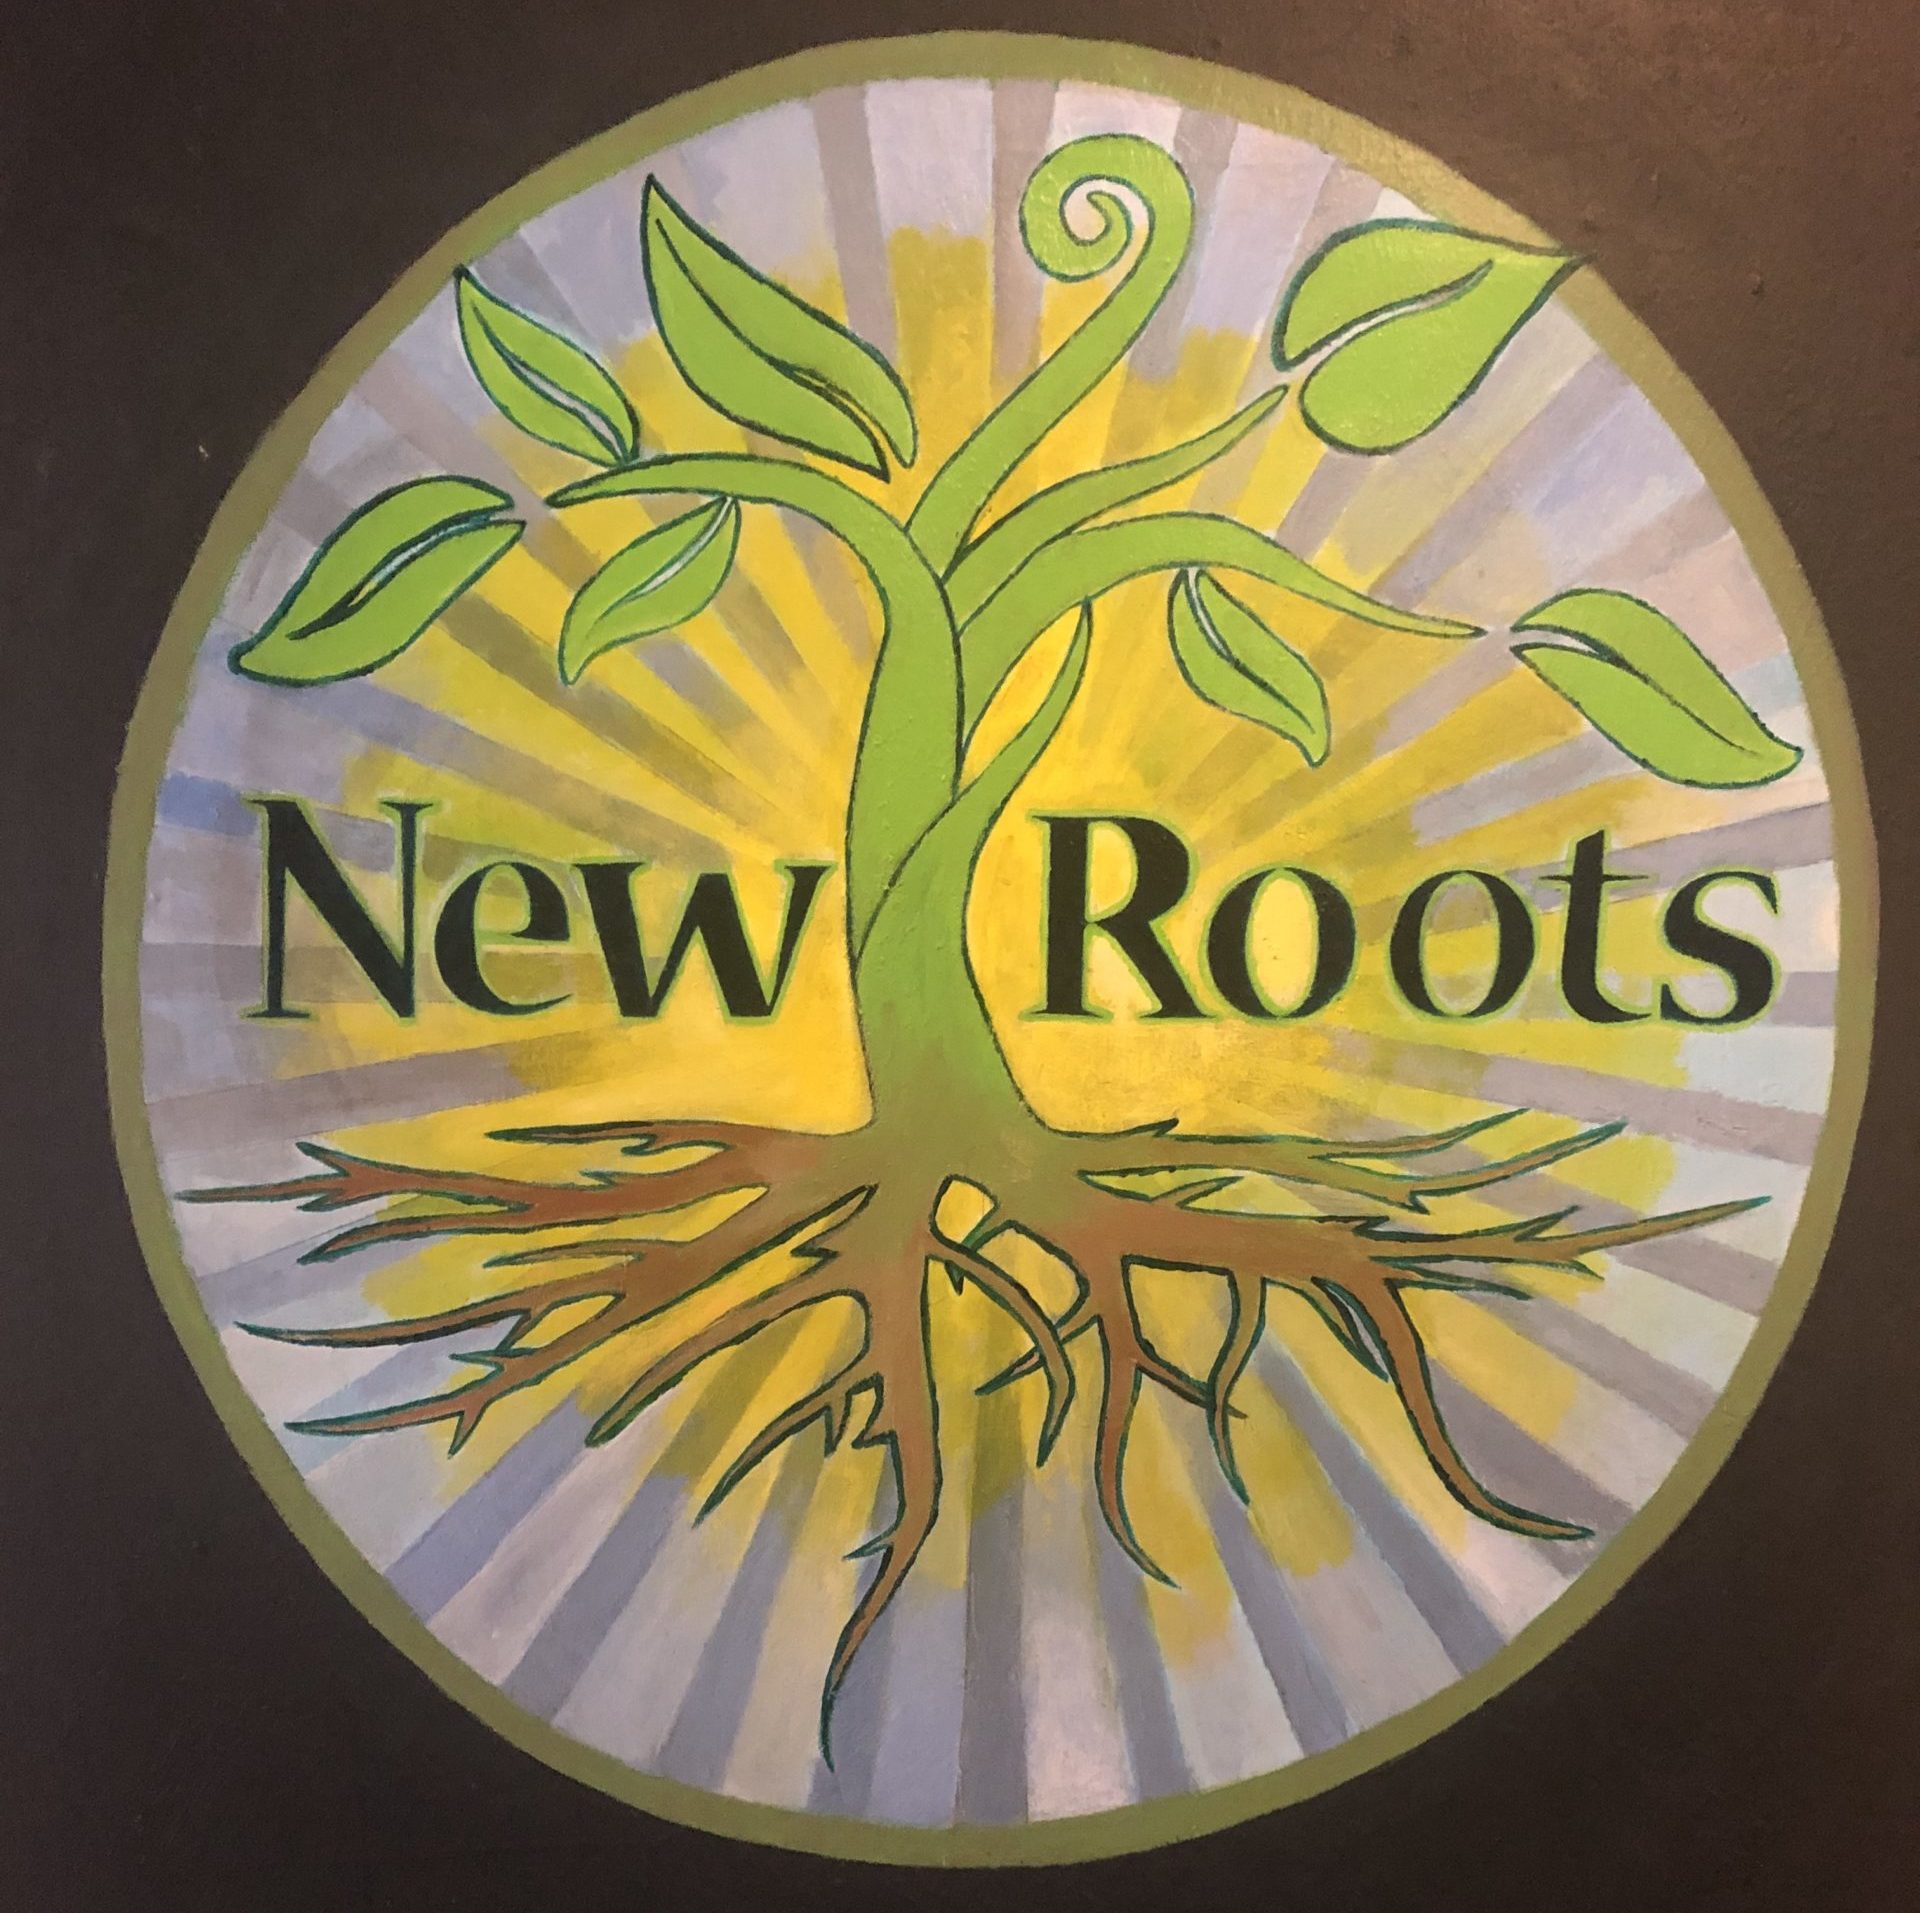 New Roots on Schedule to Open September 9, 2020